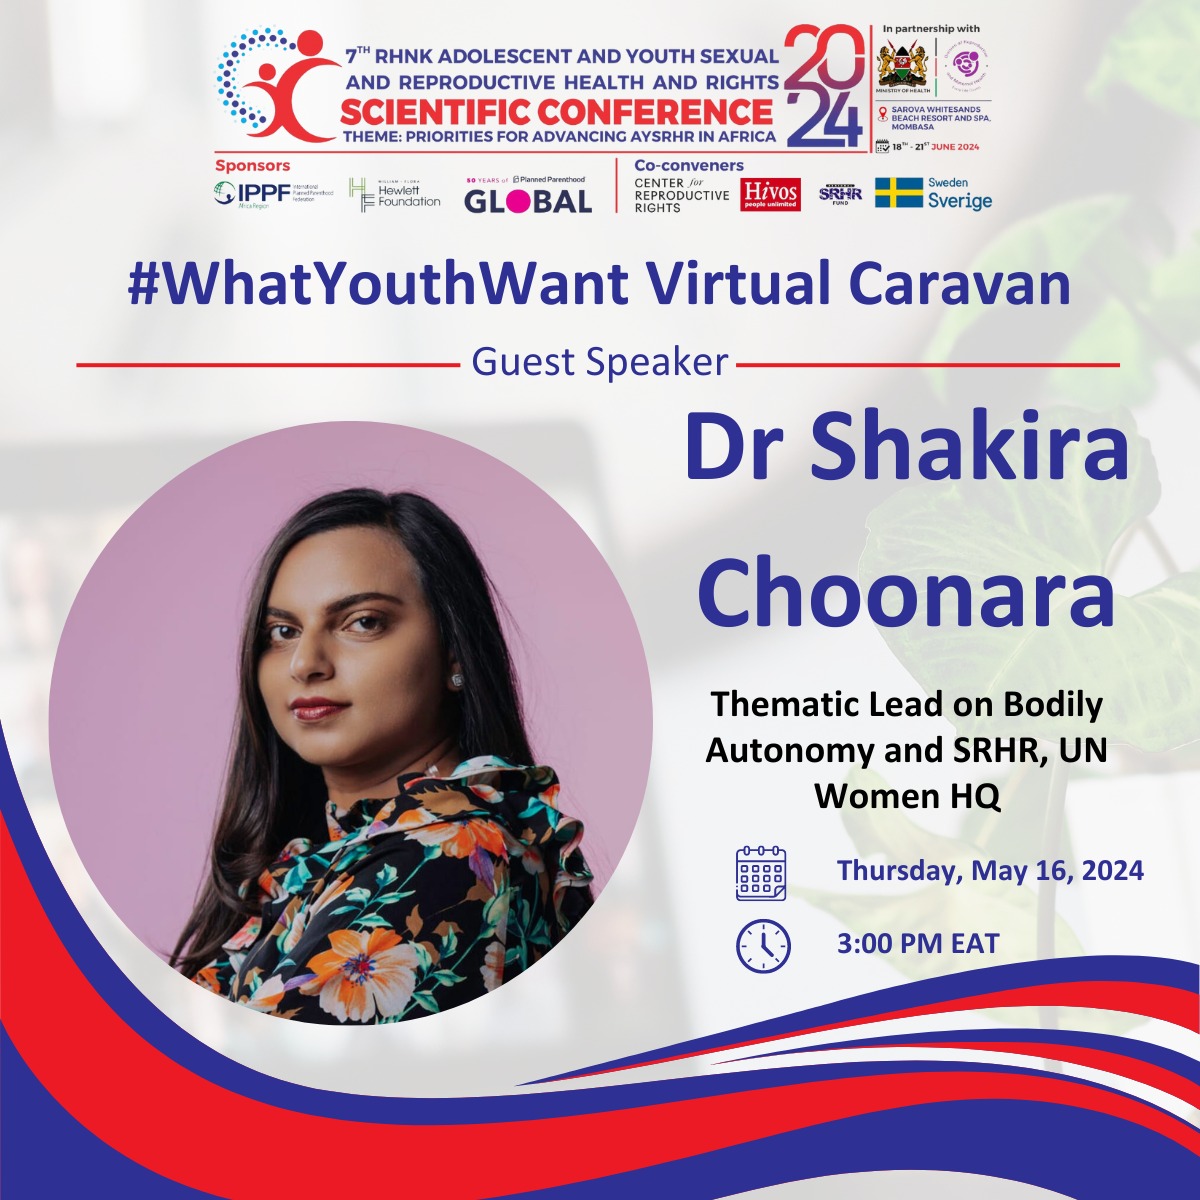 Introducing the amazing  @ChoonaraShakira as our guest speaker for the virtual caravan. You definitely don't wanna miss hearing from her
Register today and see you of Thursday 
us02web.zoom.us/meeting/regist…

#RHNKCONFERENCE2024 
@rhnkorg 
@IPPFAR